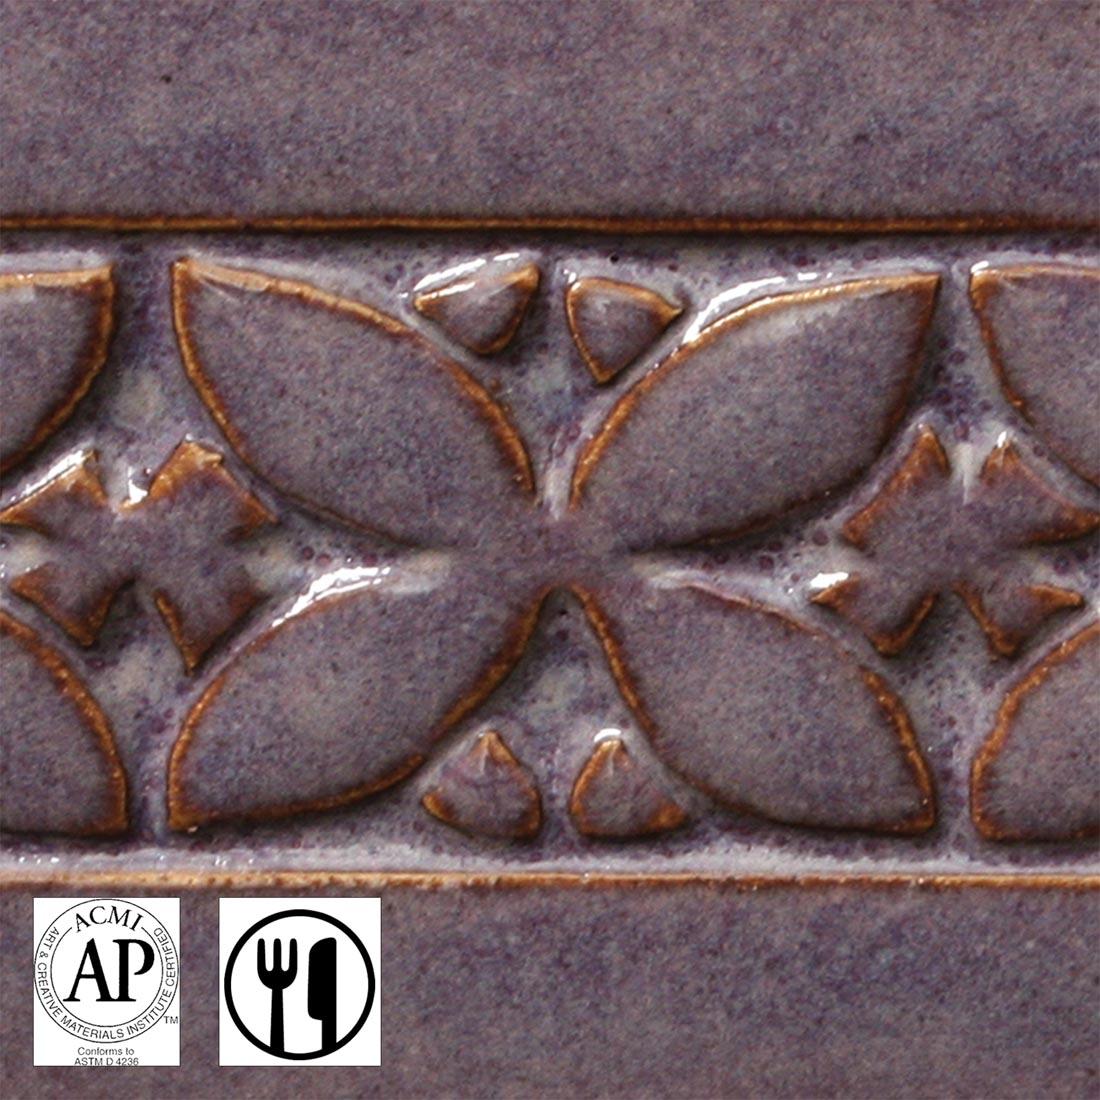 clay tile with Smokey Merlot AMACO Potter's Choice High Fire Glaze applied; symbols for AP Seal and food safe